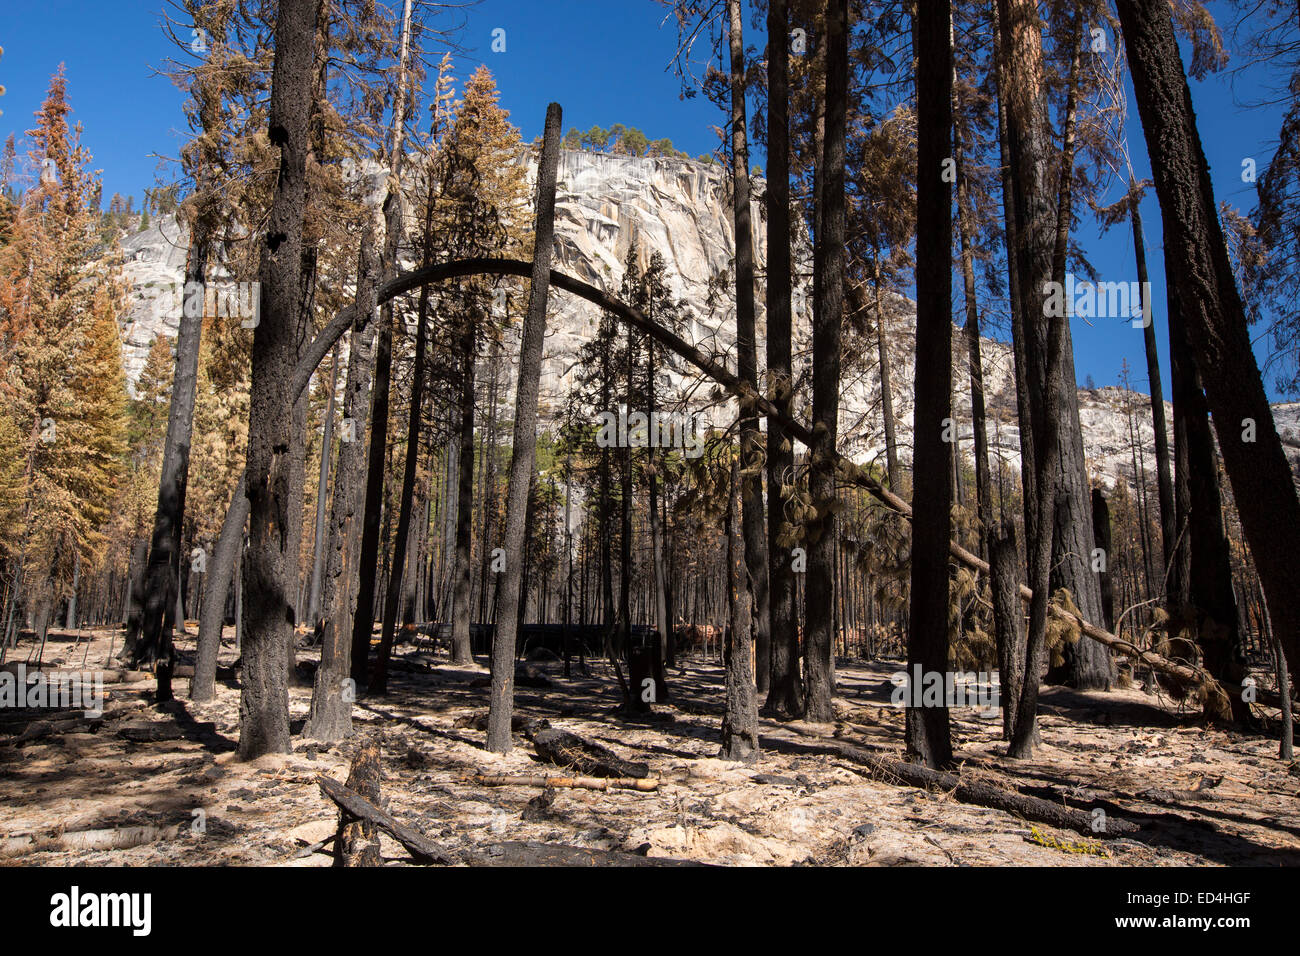 A forest fire destroys an area of forest in the Little Yosemite Valley in the Yosemite National Park, California, USA. Following four years of unprecedented drought, wildfires are becoming increasingly common. This fire was started by a lightening strike. Stock Photo